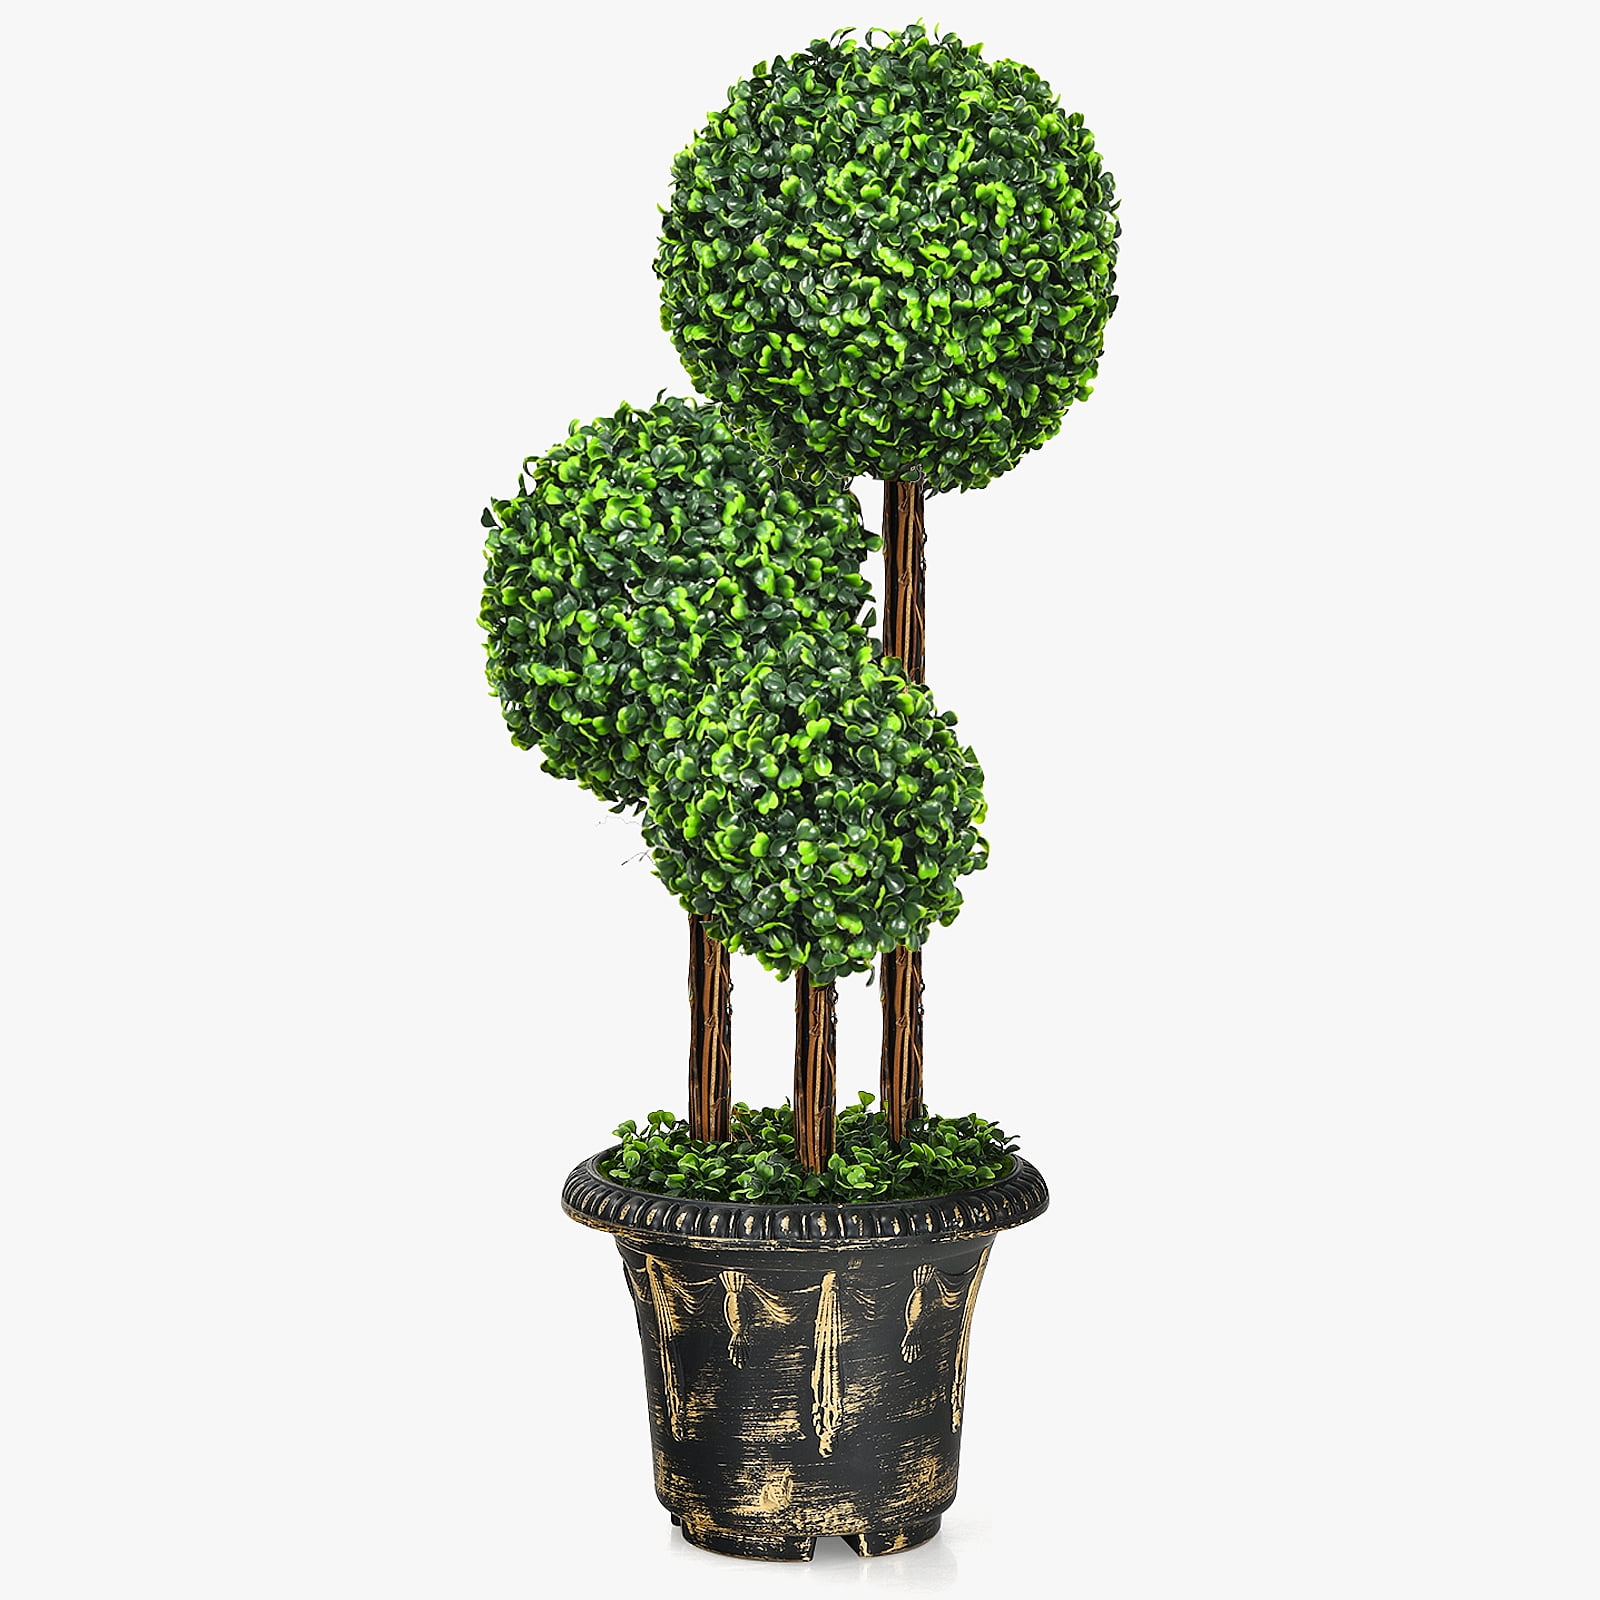 Set of 2 Decorative Lavender Plants Artificial Fake Lavender Flowers Ball Shaped Plant Tree 13.5 Inches Boxwood Topiary Tree in Ceramic Pots 